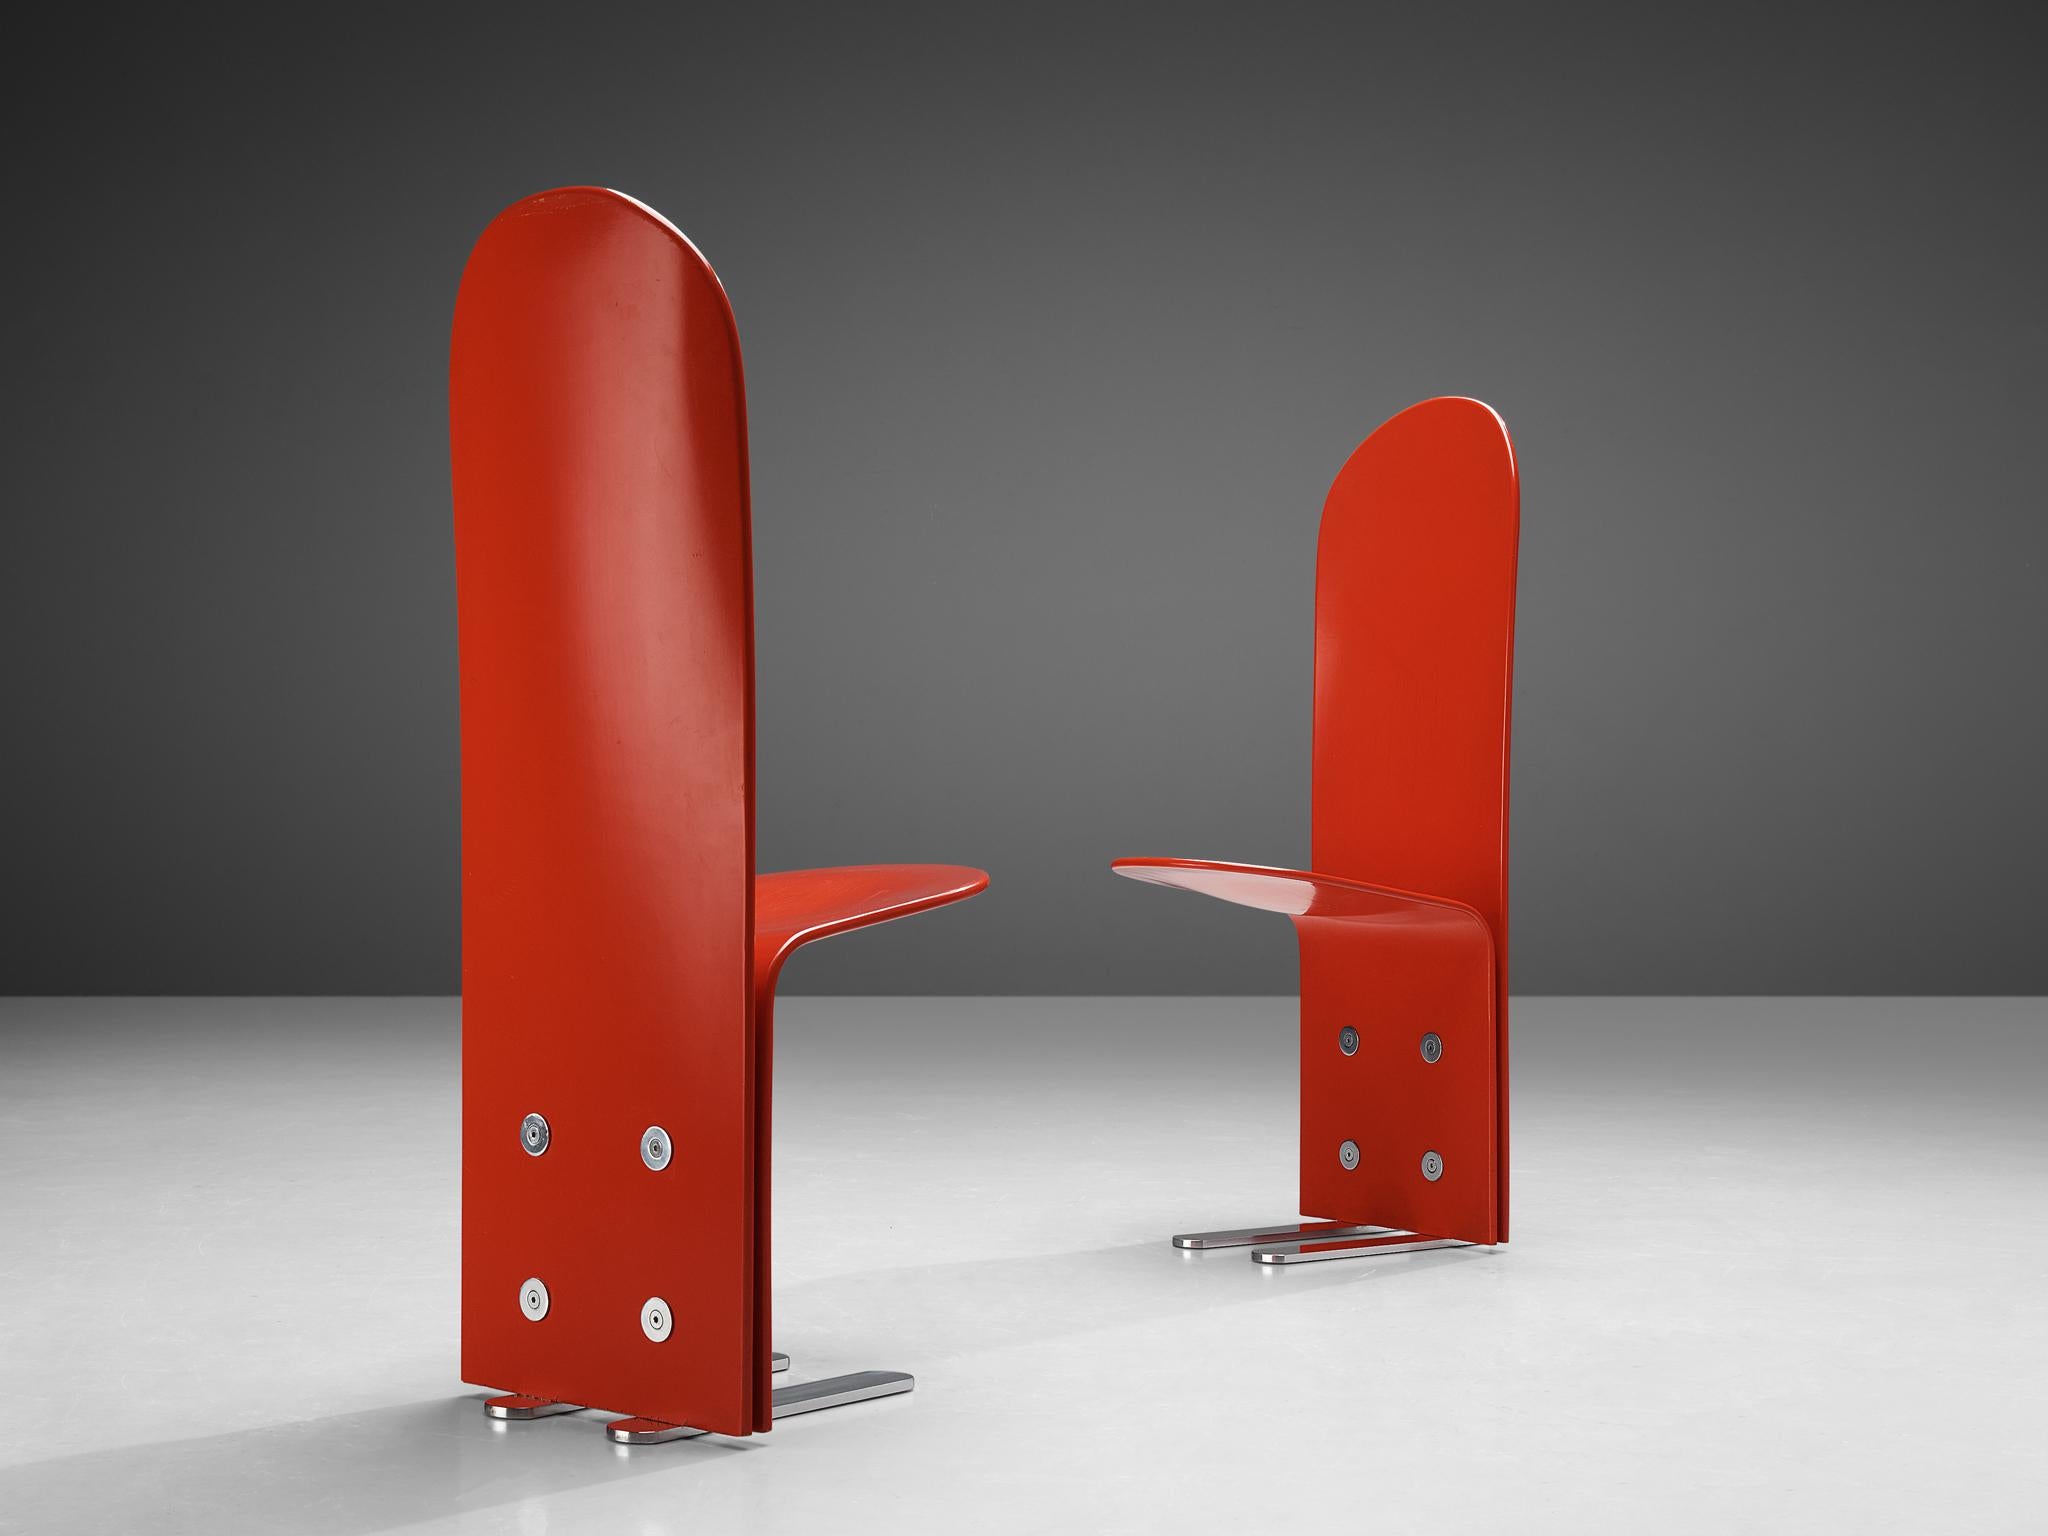 Luigi Saccardo for Arrmet, dining chairs, model 'Pelicano', lacquered plywood, chrome-plated metal, 1970s

Eccentric chairs executed in red lacquered plywood. The remarkable high back give these chairs a stately appearance. Its simplistic frame